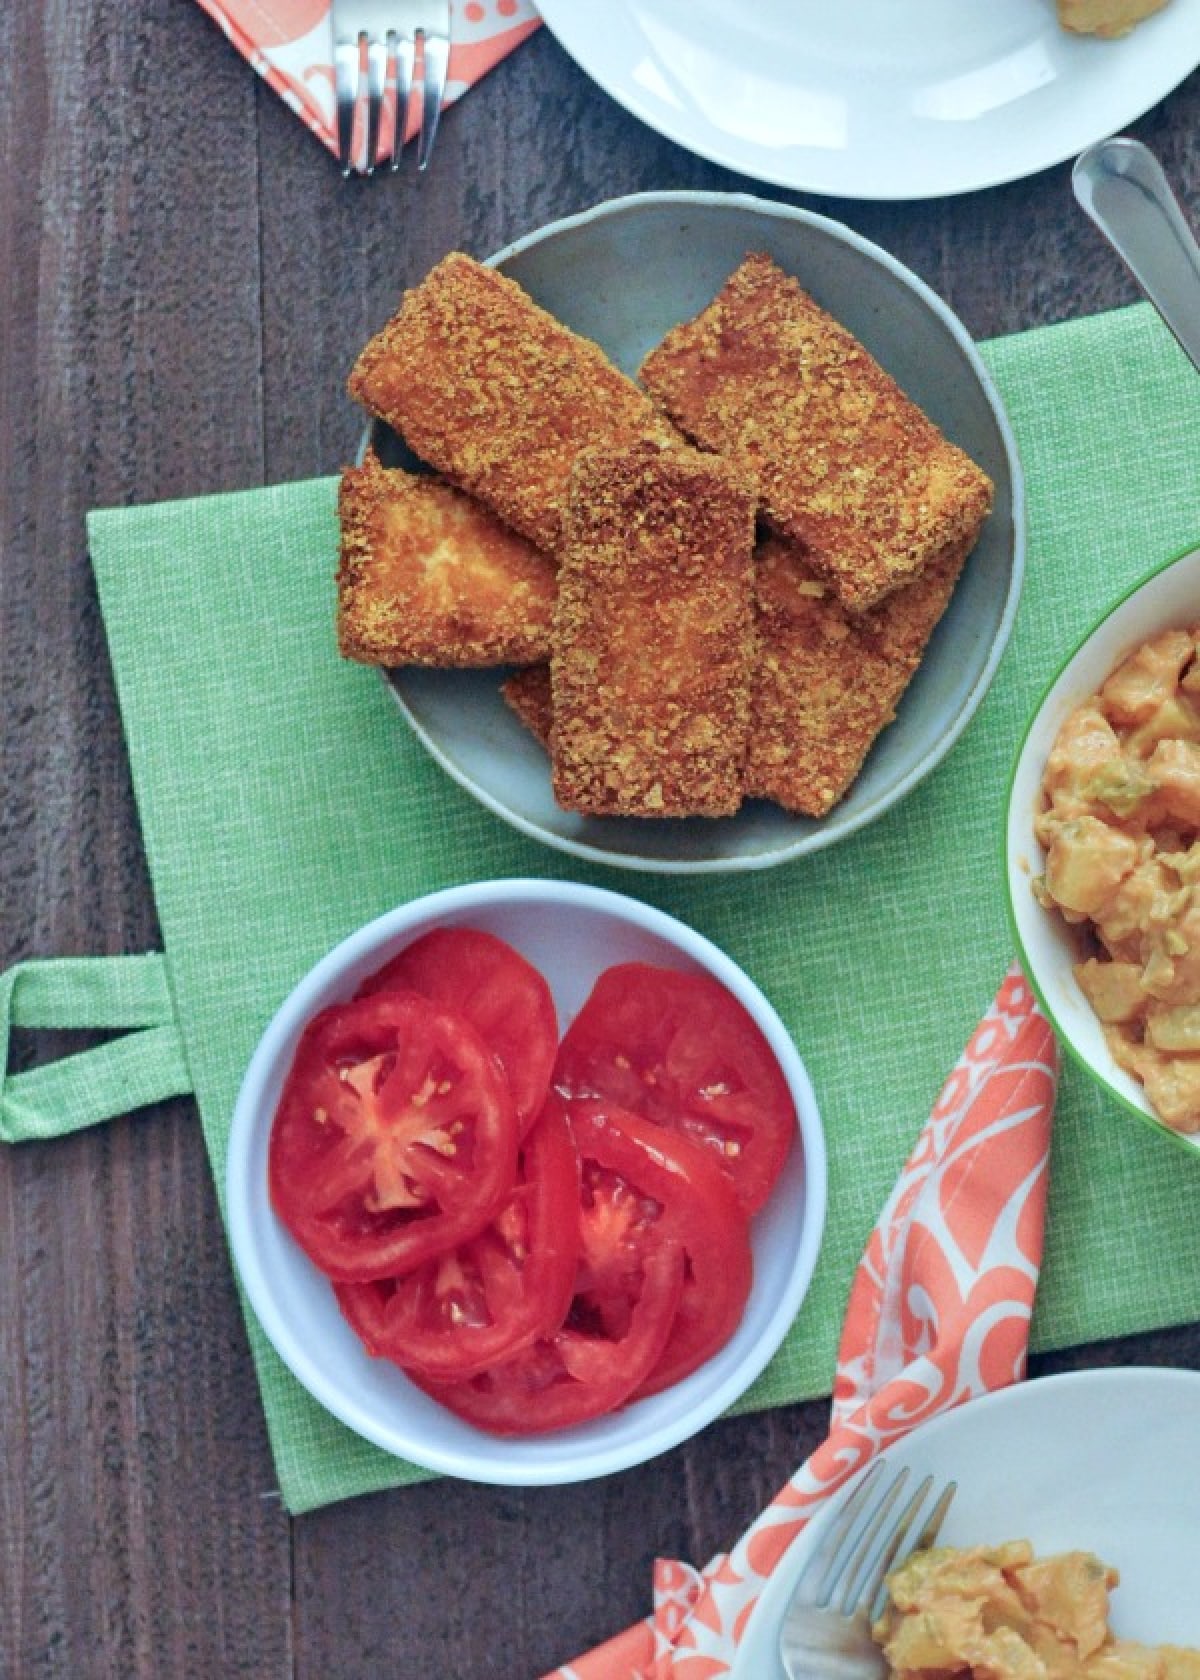 Overhead view of several slices of crispy fried tofu on a grey dish next to a dish of sliced tomatoes and a bowl of potato salad.